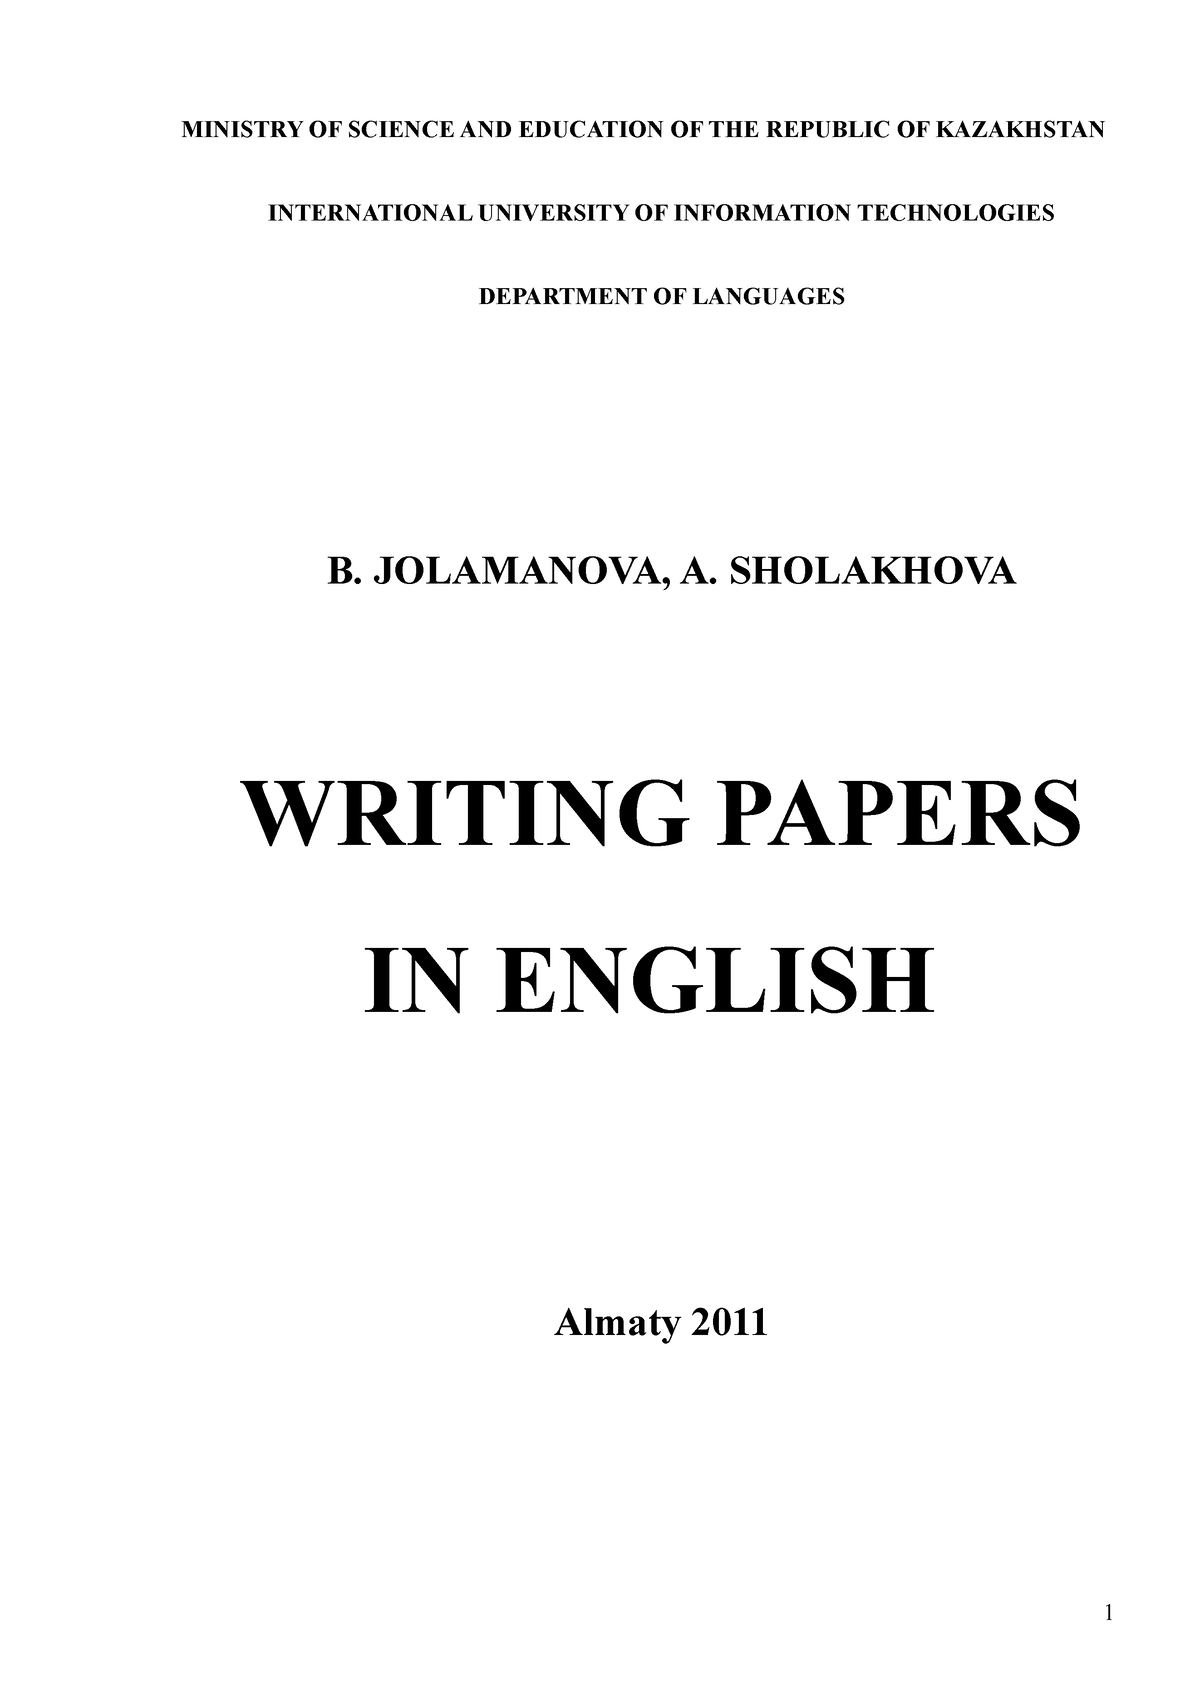 writing-papers-in-english-final-version-march-11-2011-ministry-of